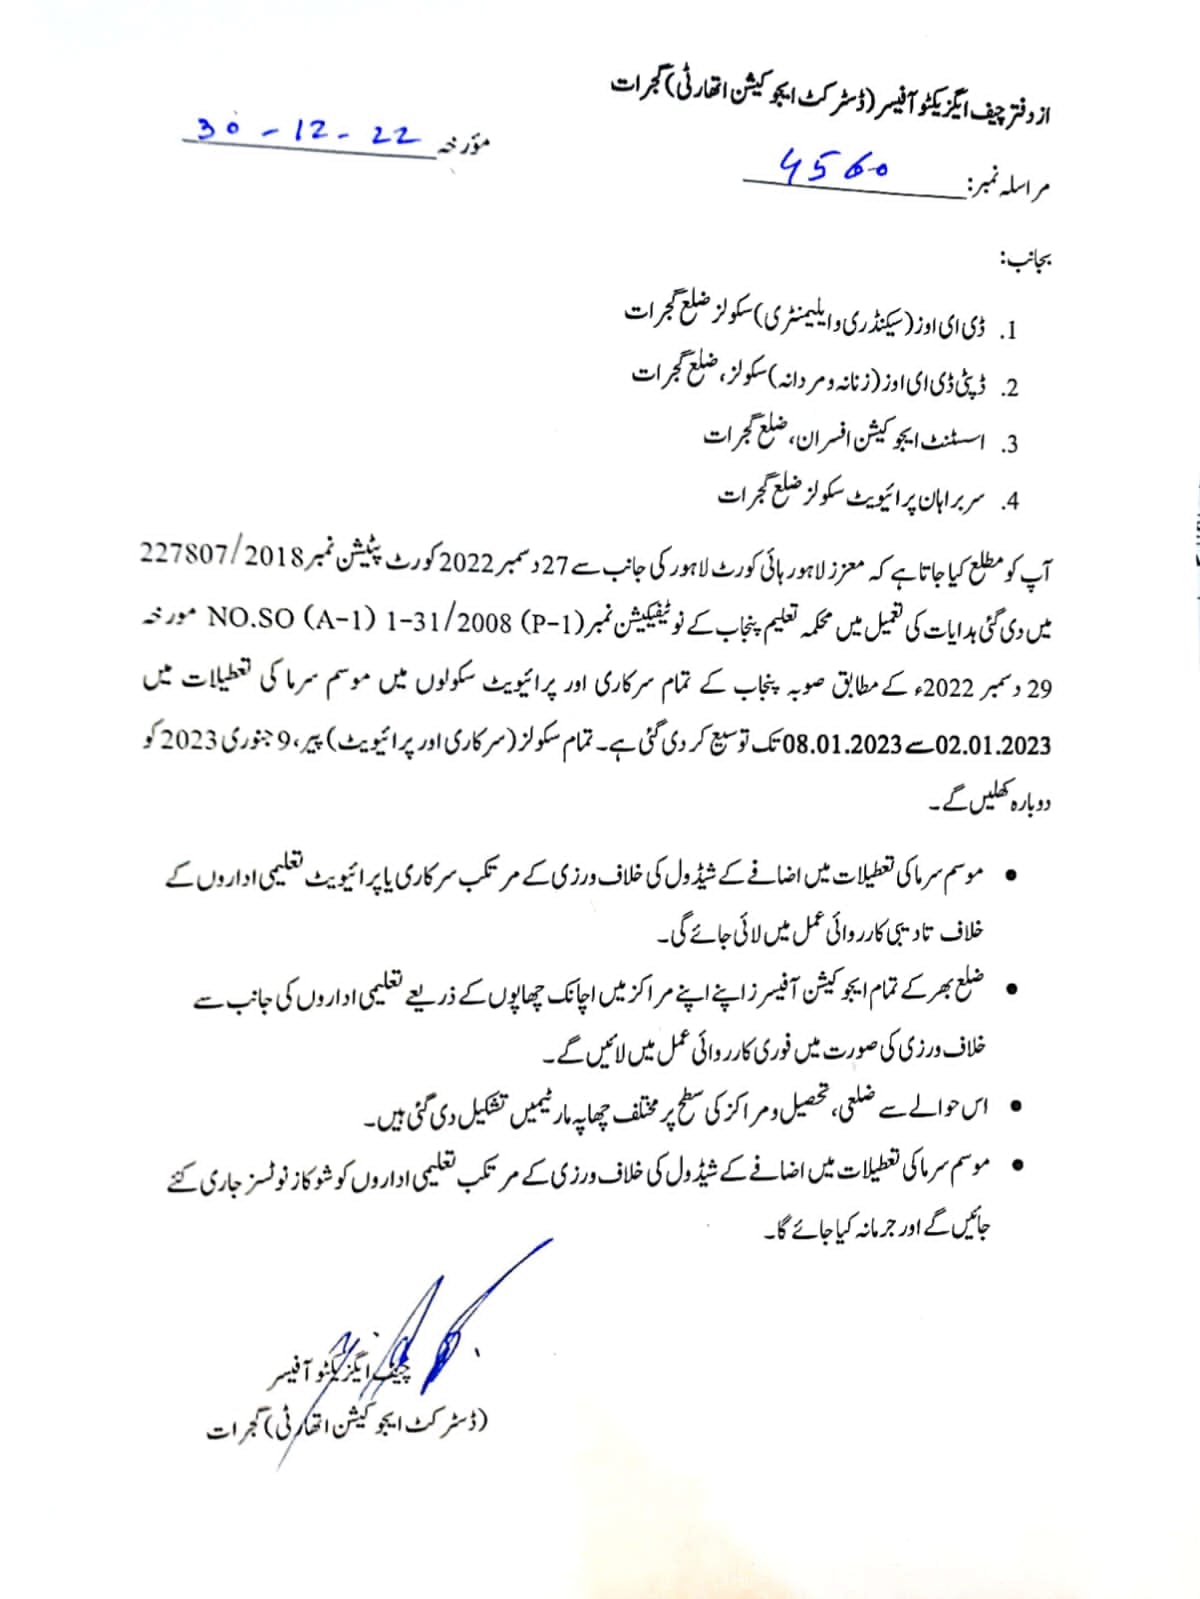 Action against Educational Institutions not observing Winter Vacation 2022-23 